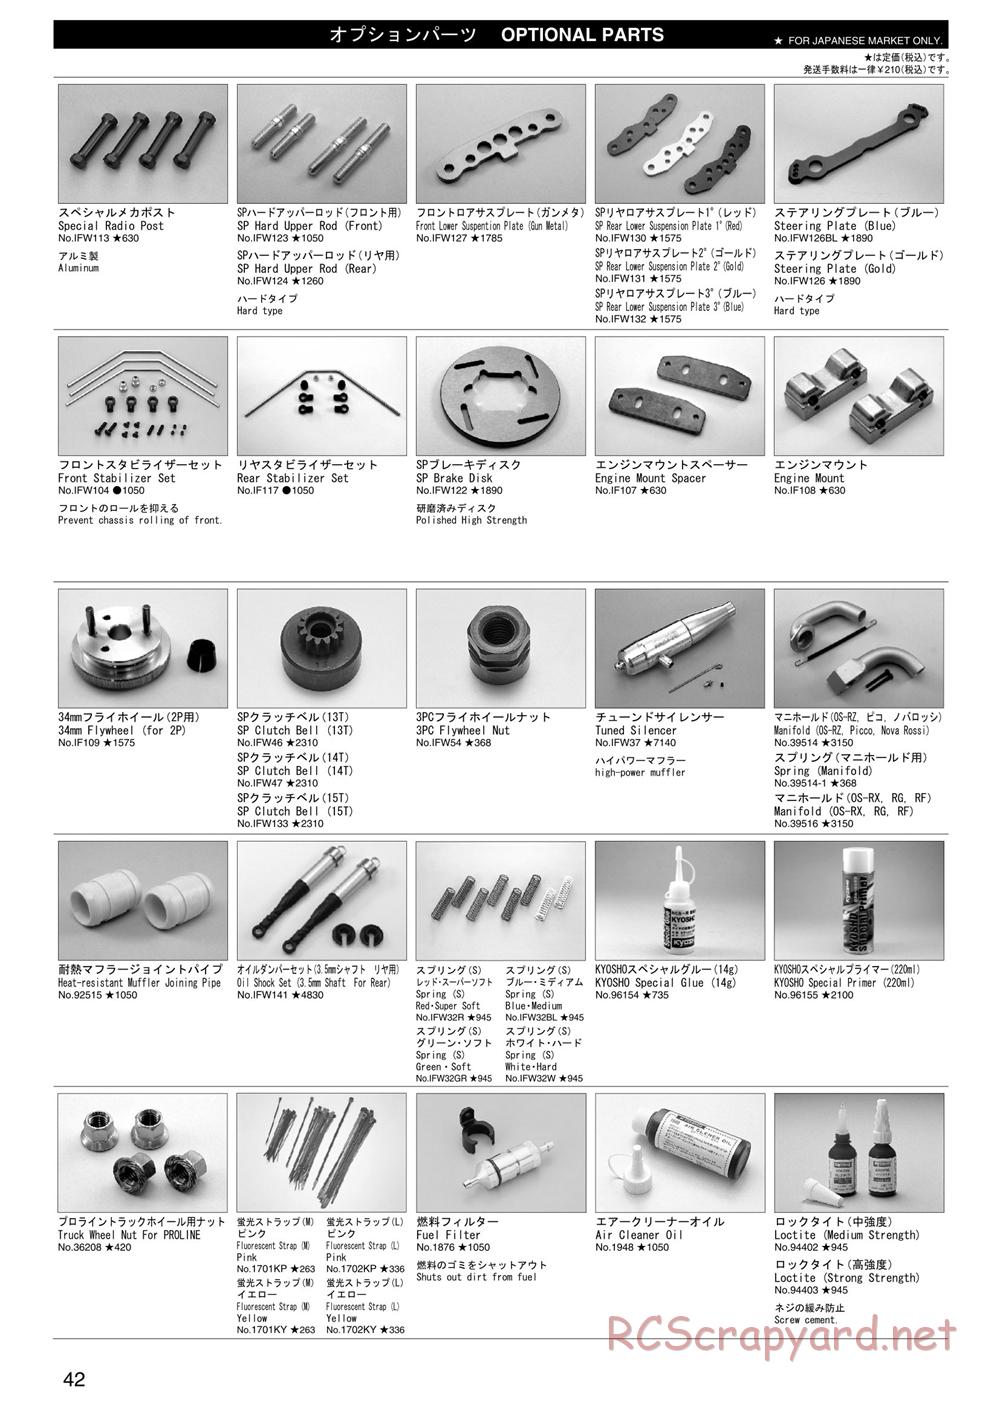 Kyosho - Inferno ST (2005) - Parts List - Page 3